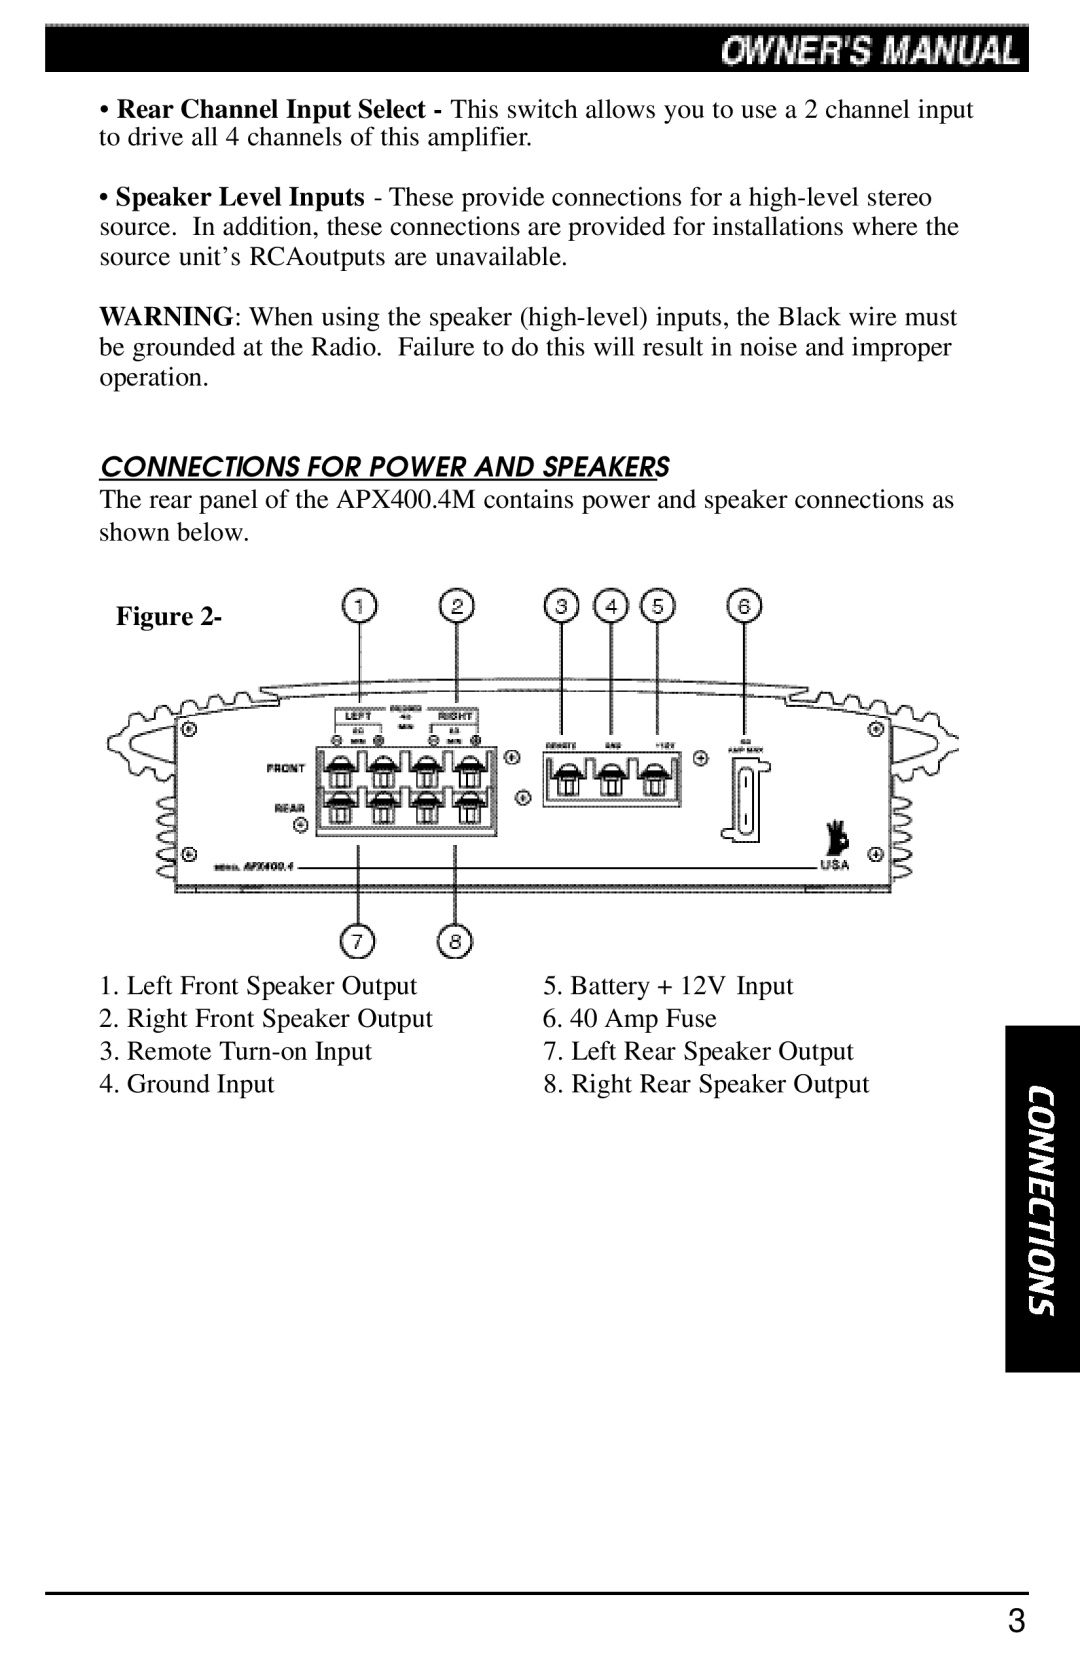 Clarion APX400 manual Connections For Power And Speakers 